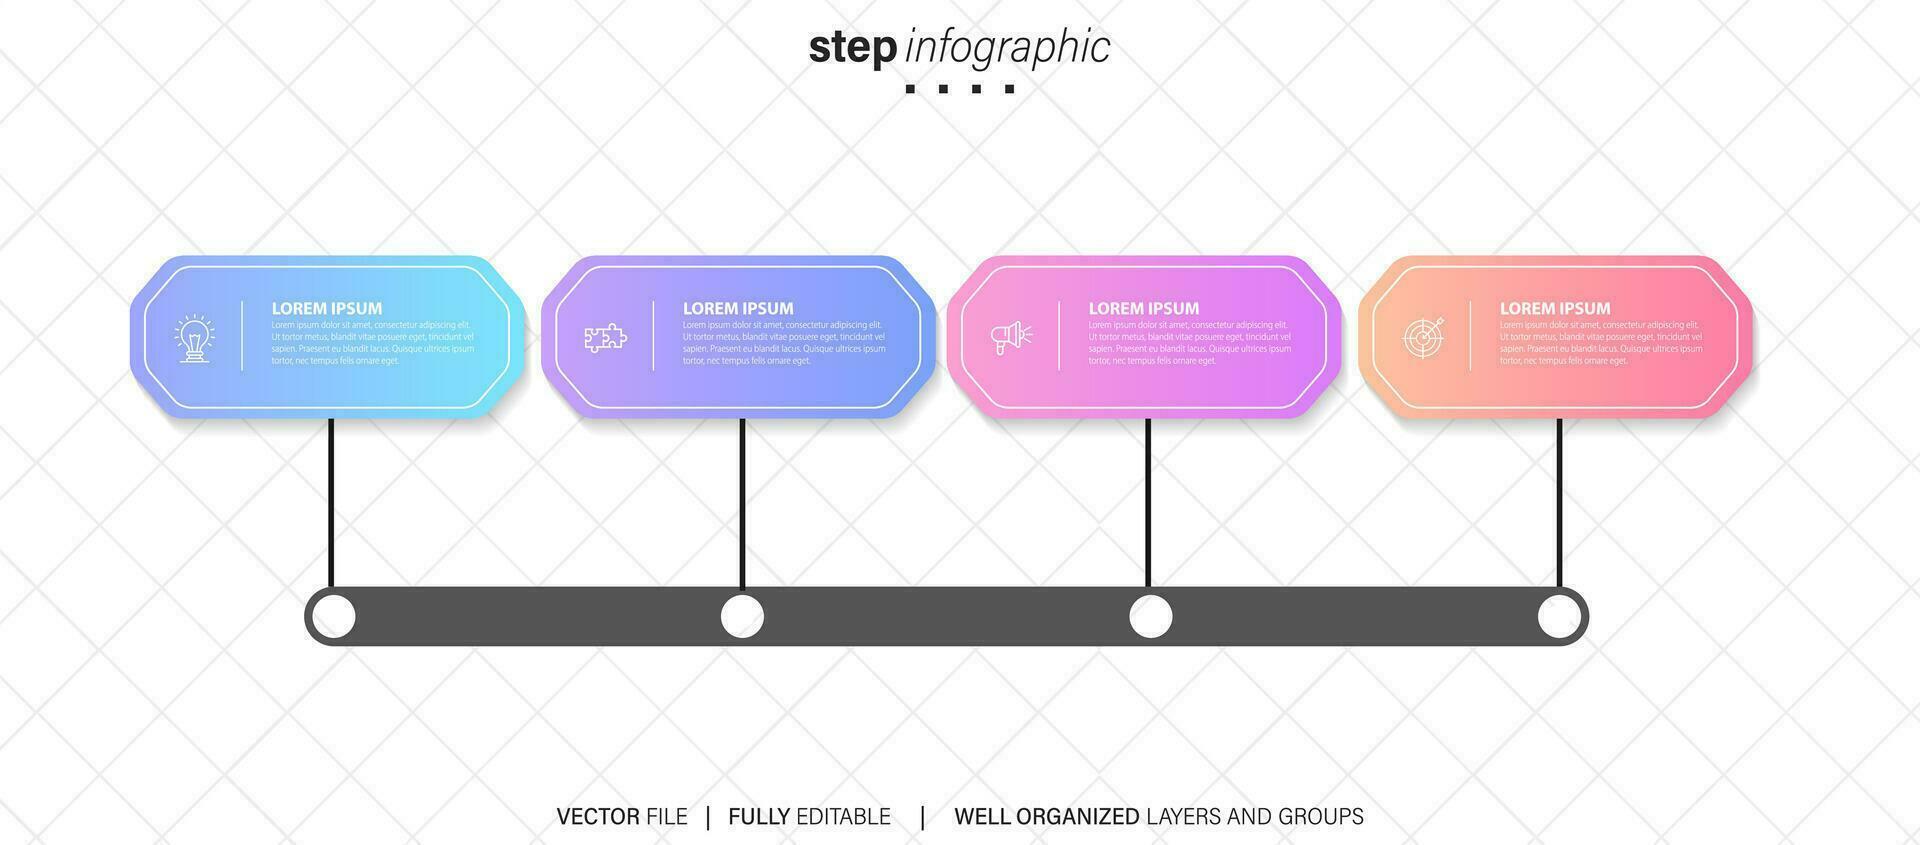 Concept of business model with 4 successive steps. Four colorful graphic elements. Timeline design for brochure, presentation. Infographic design layout vector